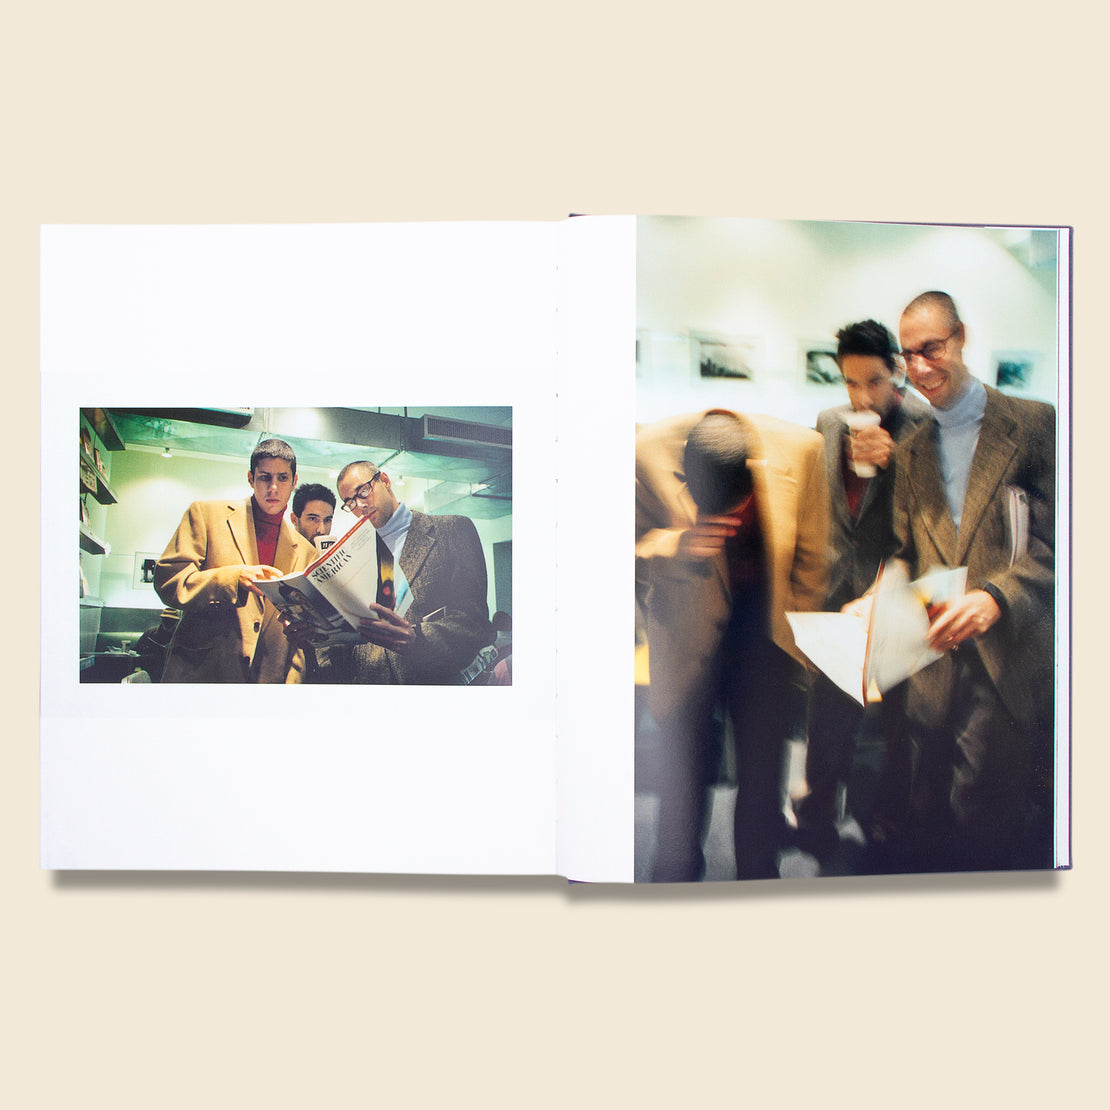 Beastie Boys by Spike Jonze - Bookstore - STAG Provisions - Home - Library - Book